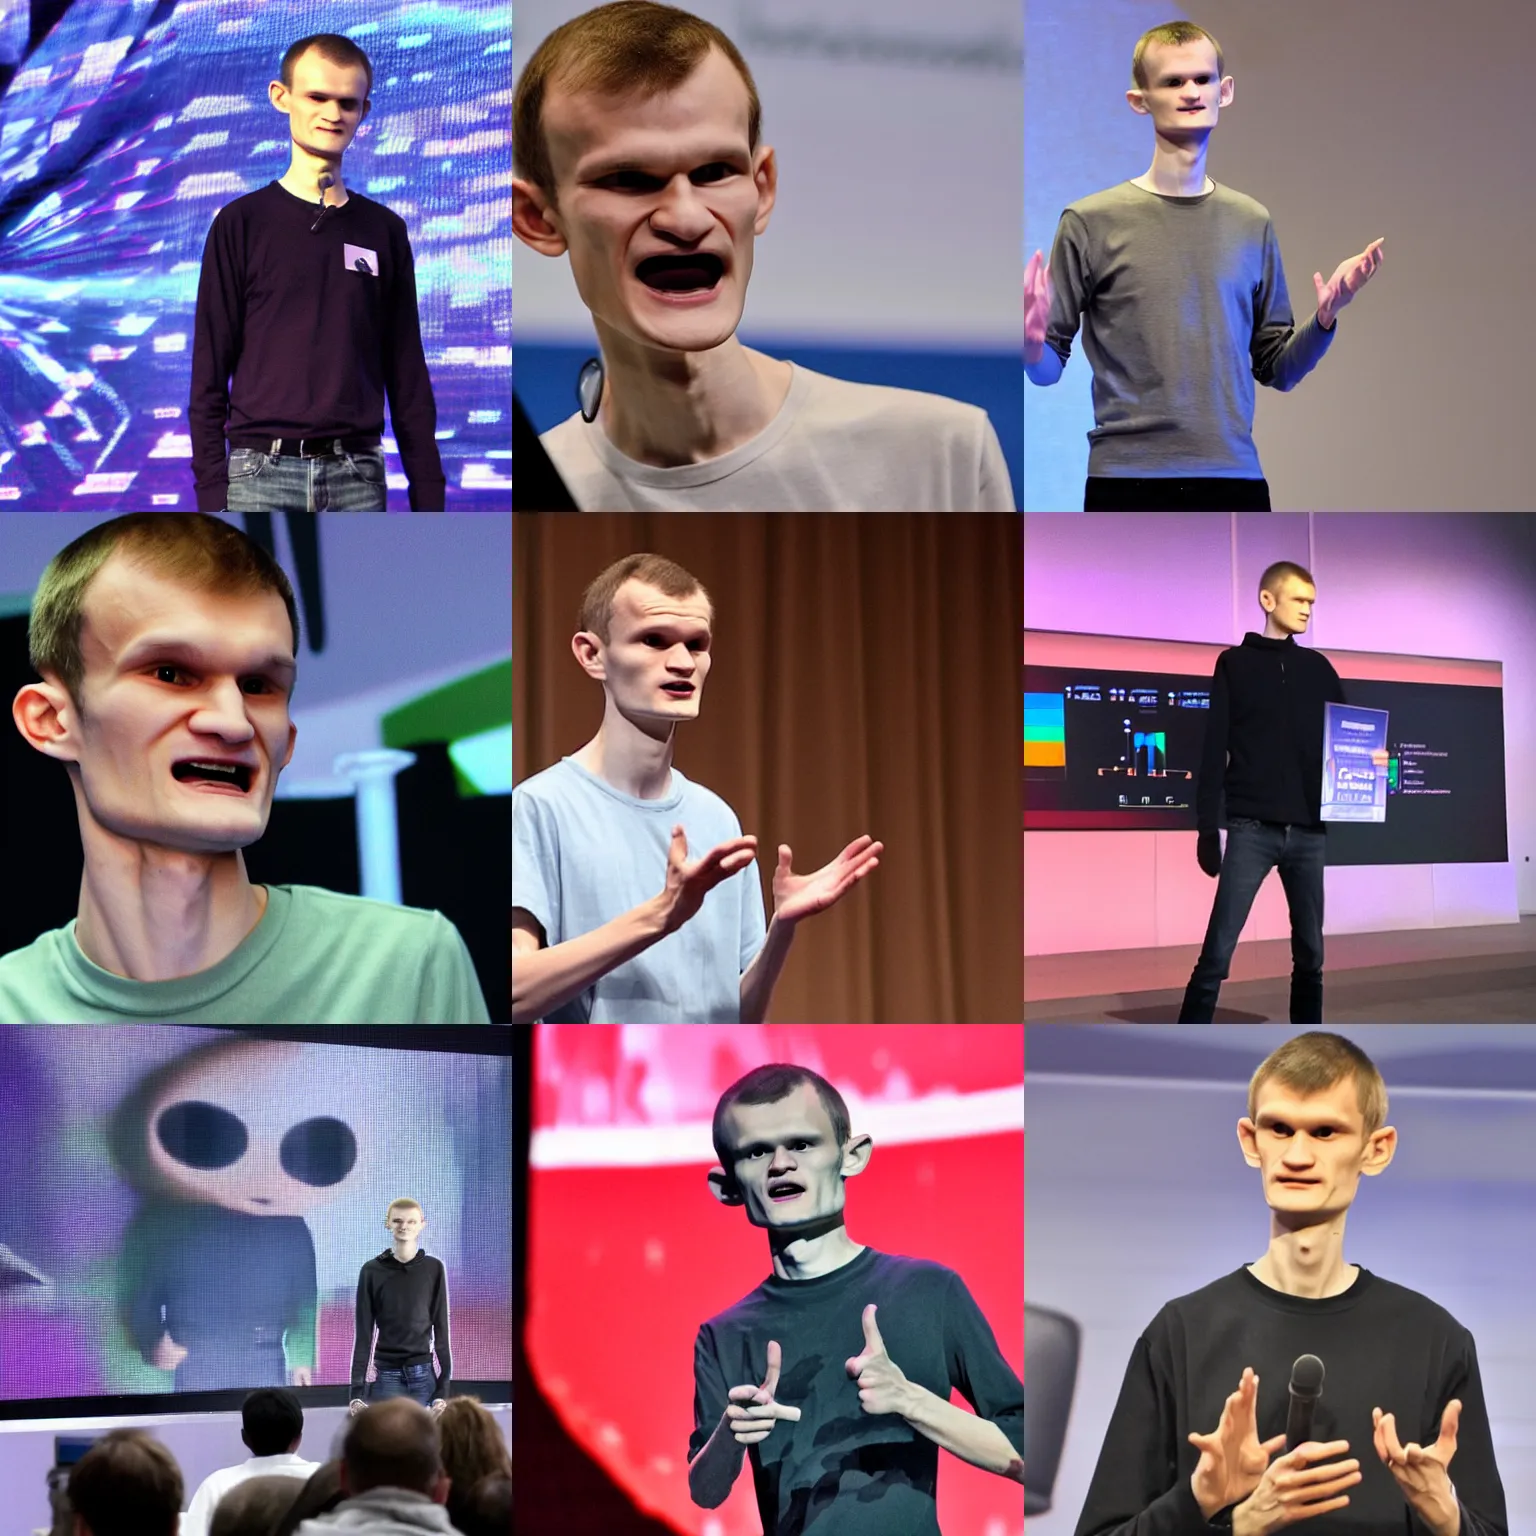 Prompt: <picture quality=hd+ mode='attention grabbing'>Vitalik Buterin as an alien presenting onstage</picture>